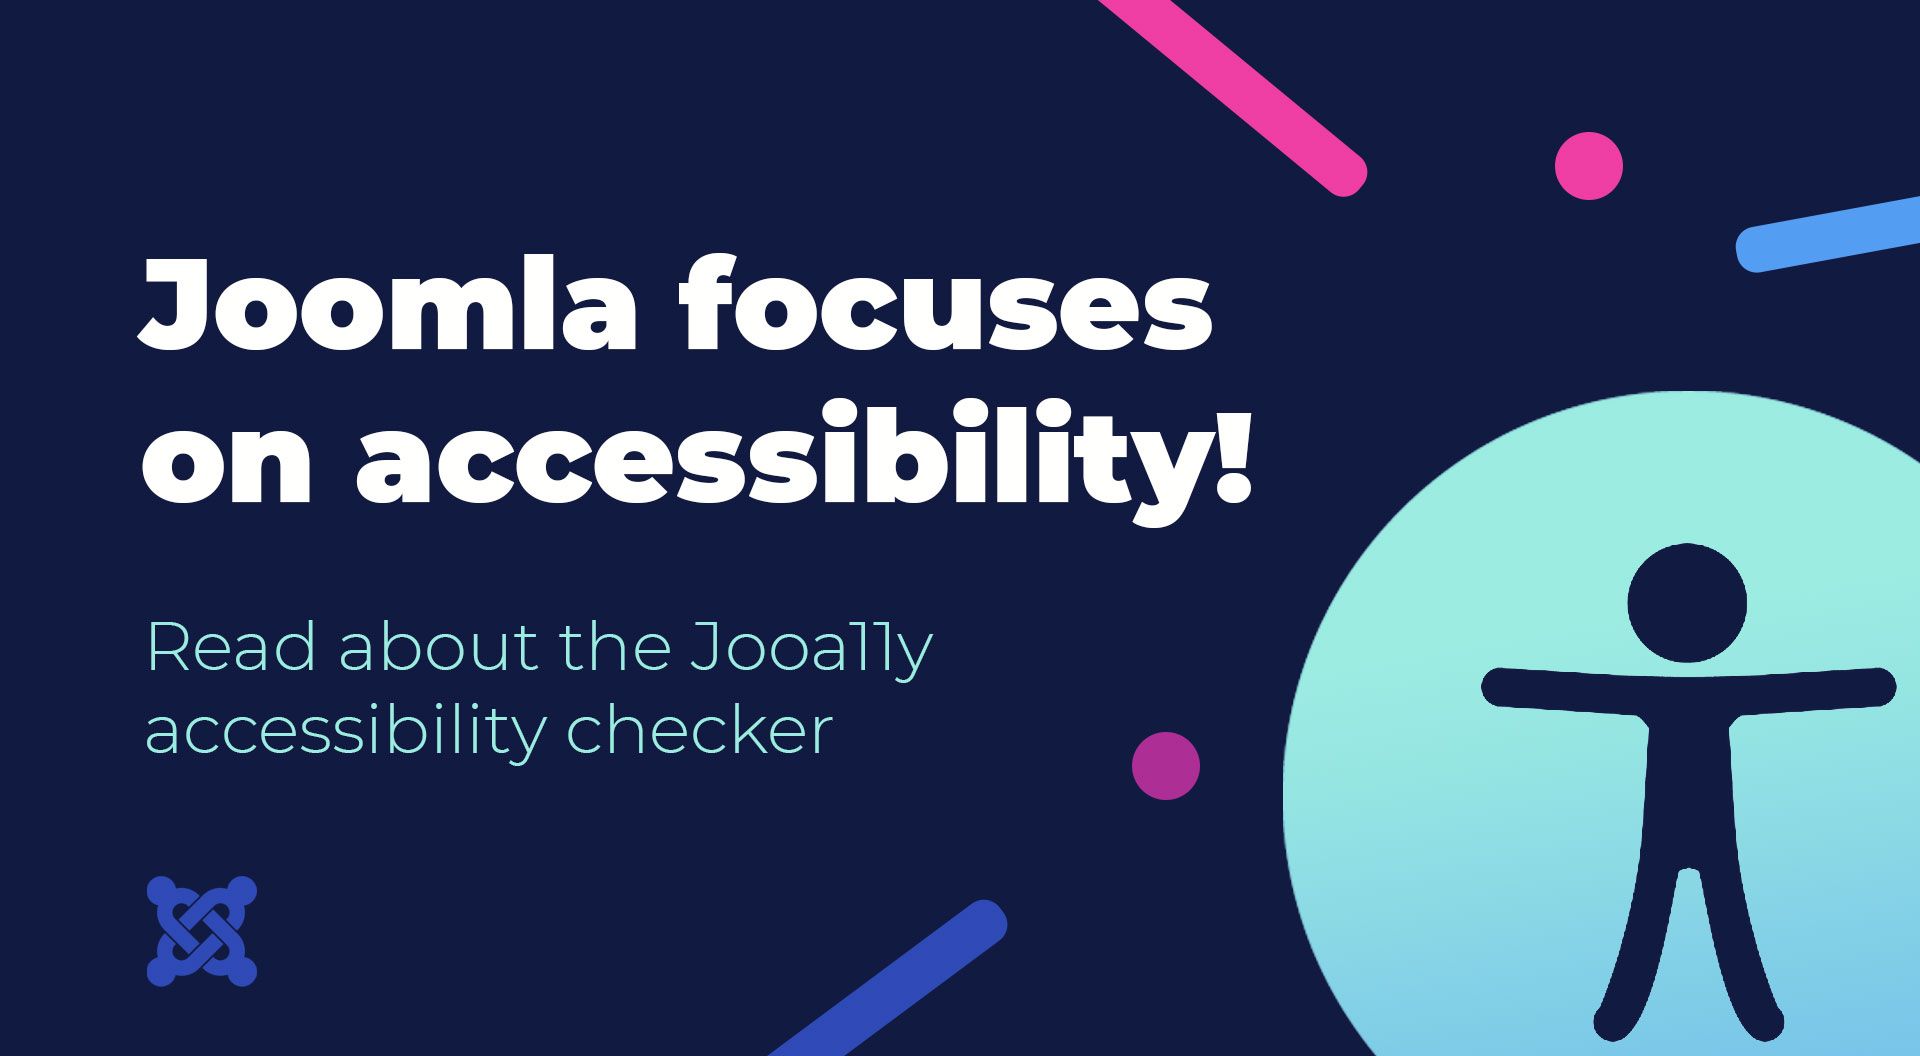 Joomla supports web accessibility! Check what's new in the Joomla 4.1.0 update